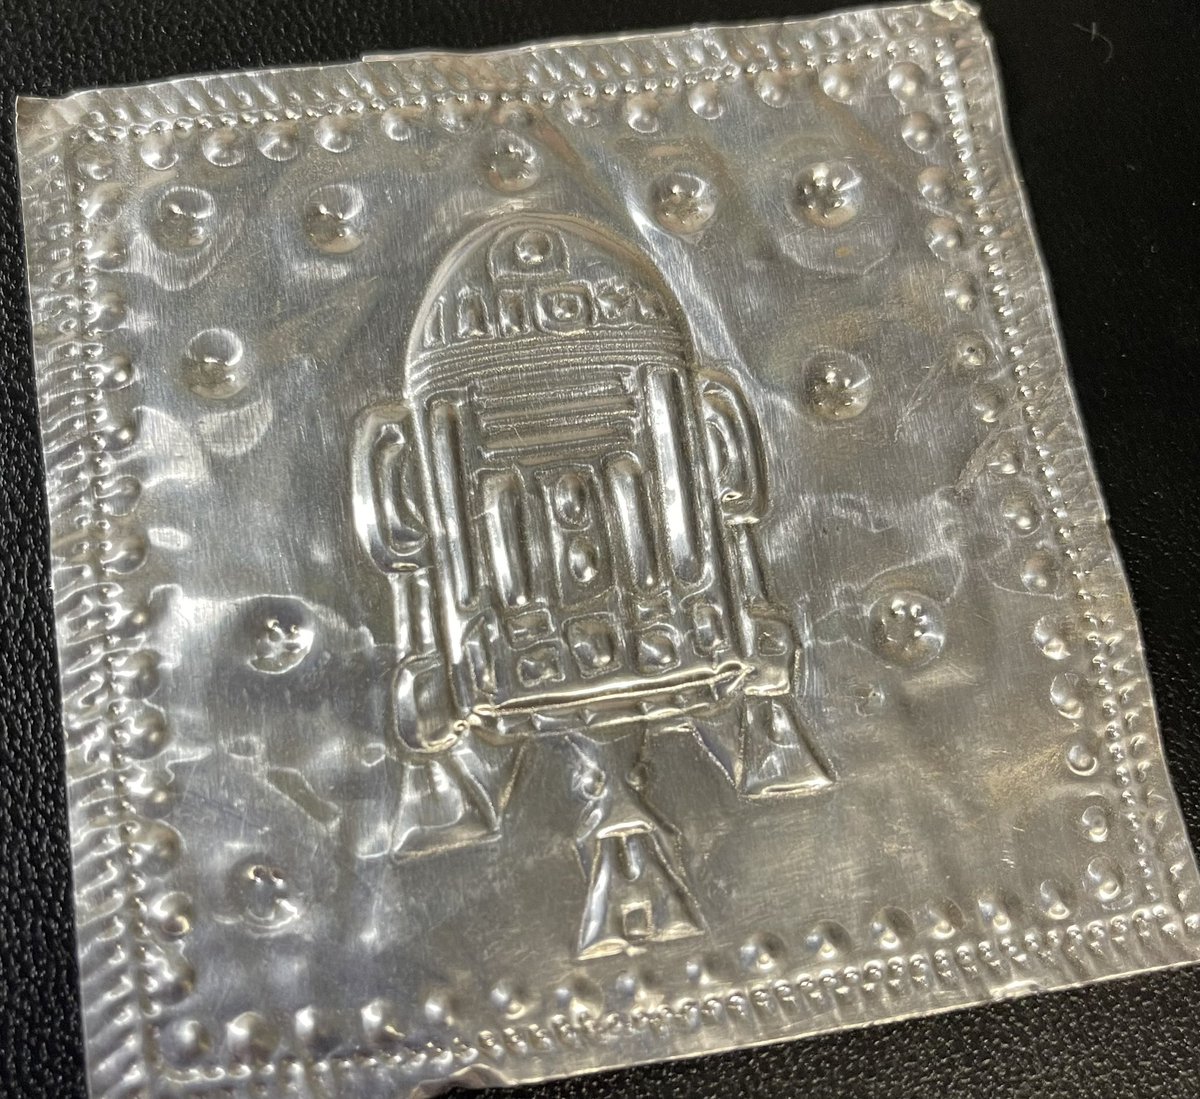 Fun things on my desk from MakerFaire past… metal embossing taught to YoungMakers ✨🫂🤟

HumansMakeCoolThings